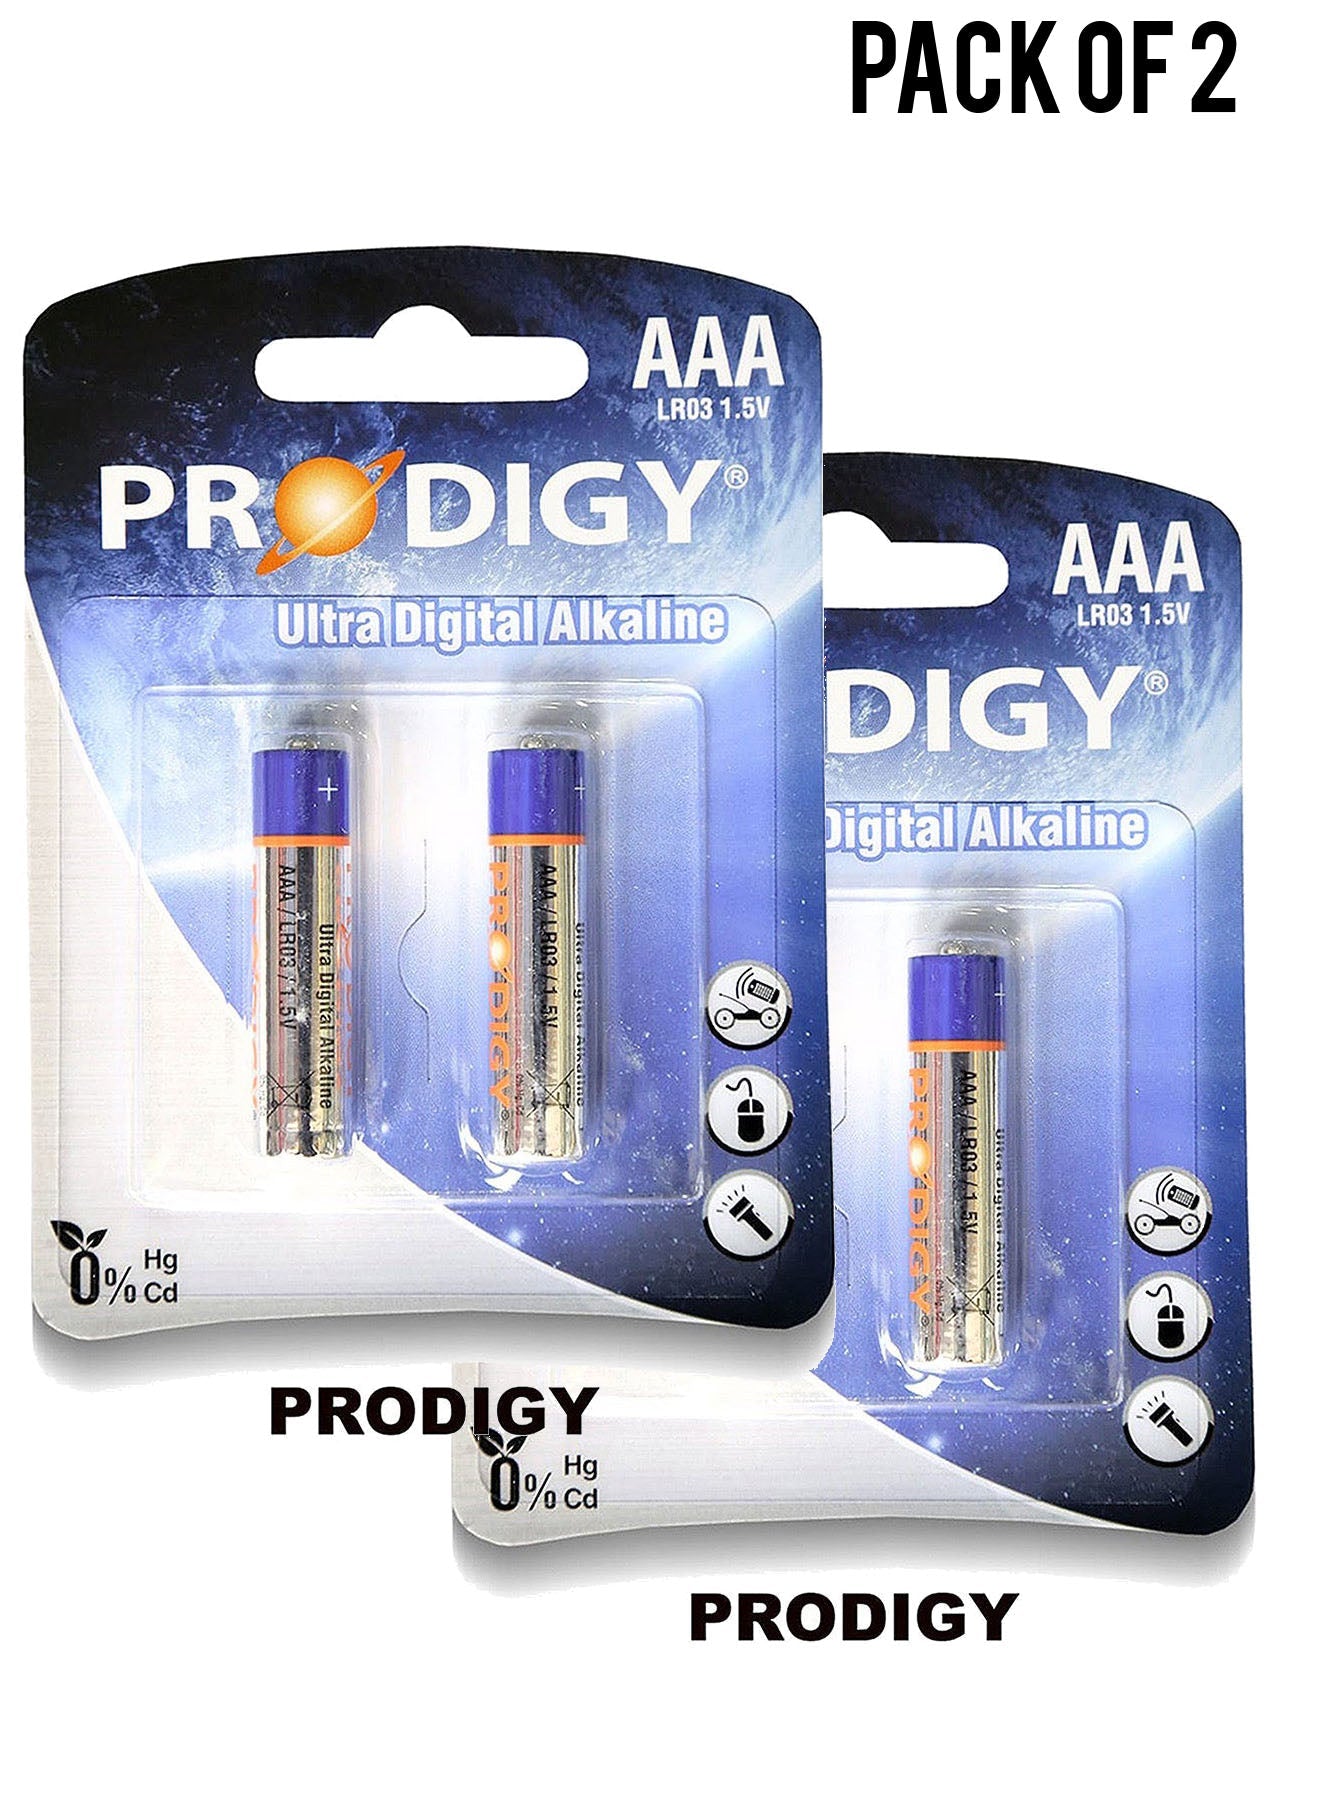 Prodigy Alkaline LR03UD AAA2 Value Pack of 2 